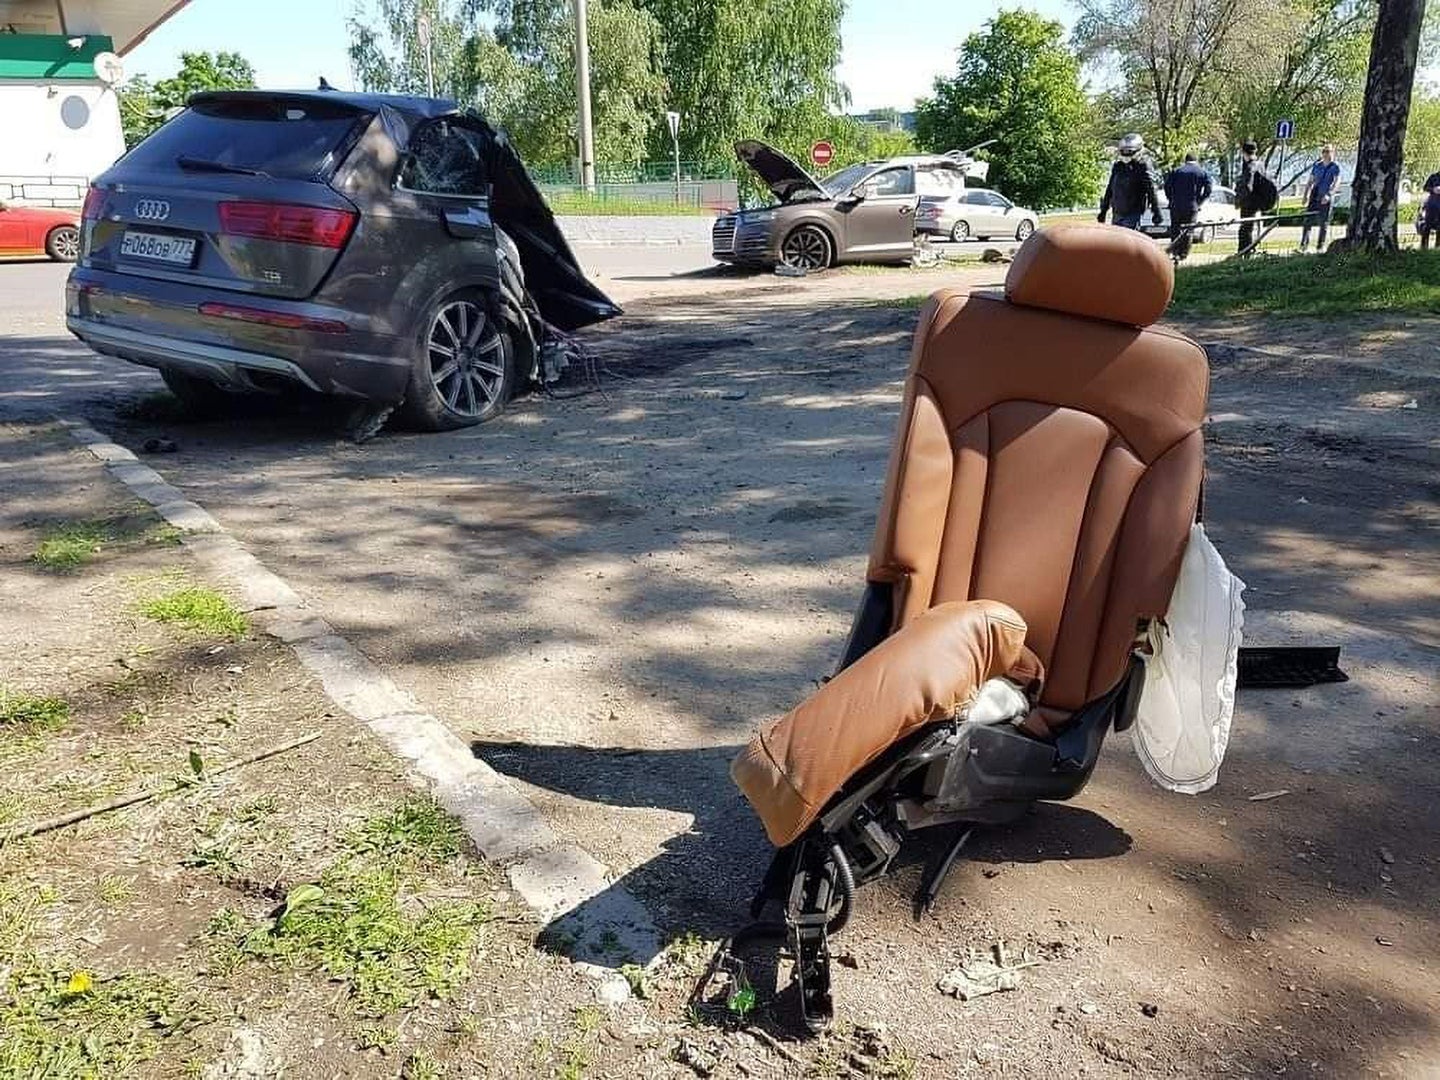 Audi Q7 SUV Split Directly in Half After High-Speed Collision With Utility Pole